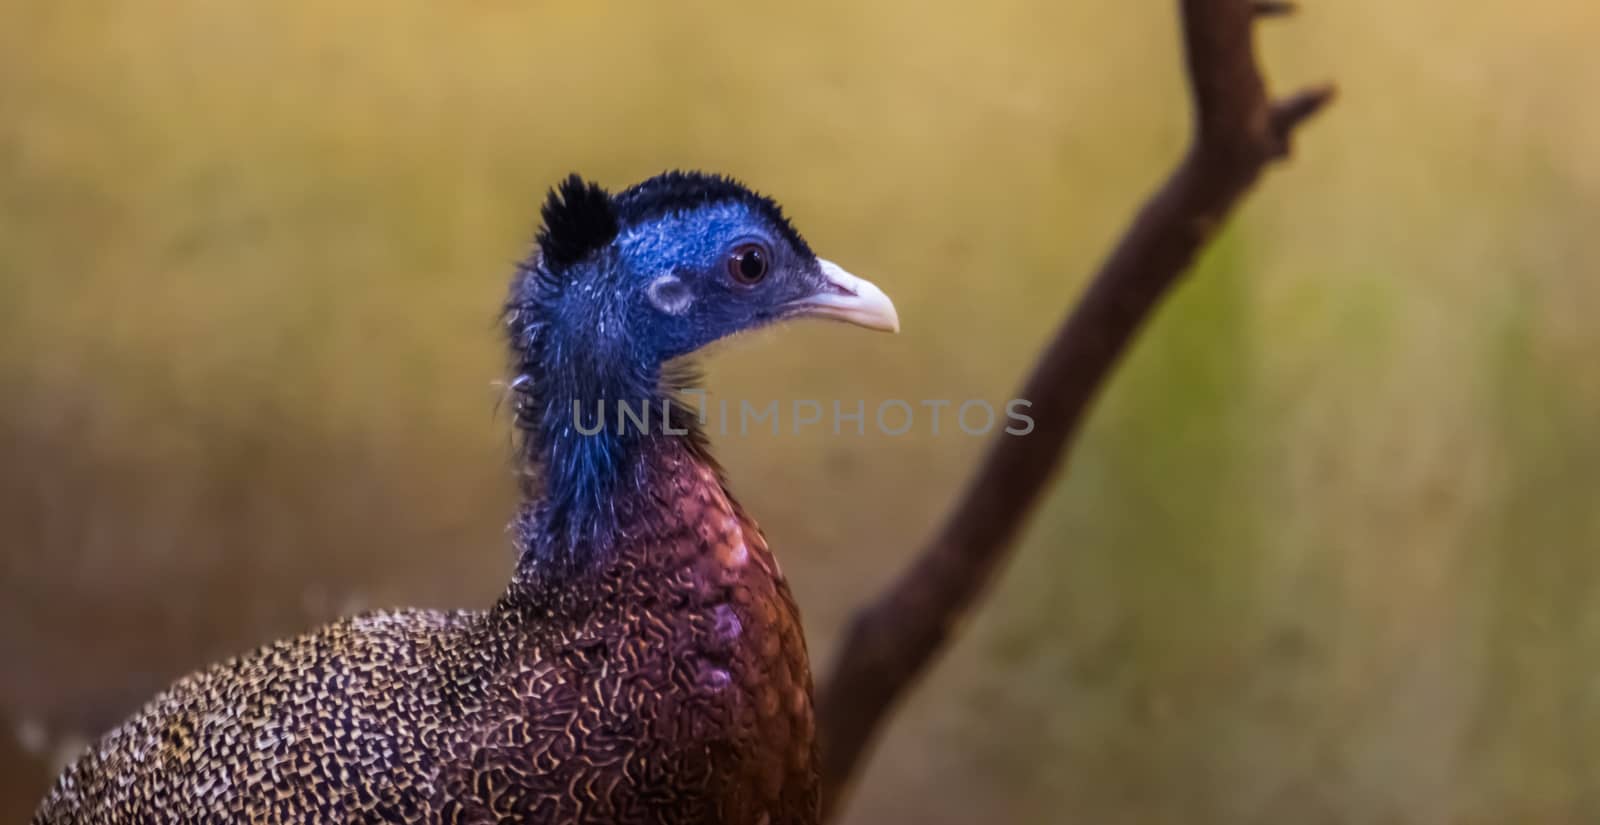 male great argus pheasant with its face in closeup, near threatened animal specie from Asia by charlottebleijenberg